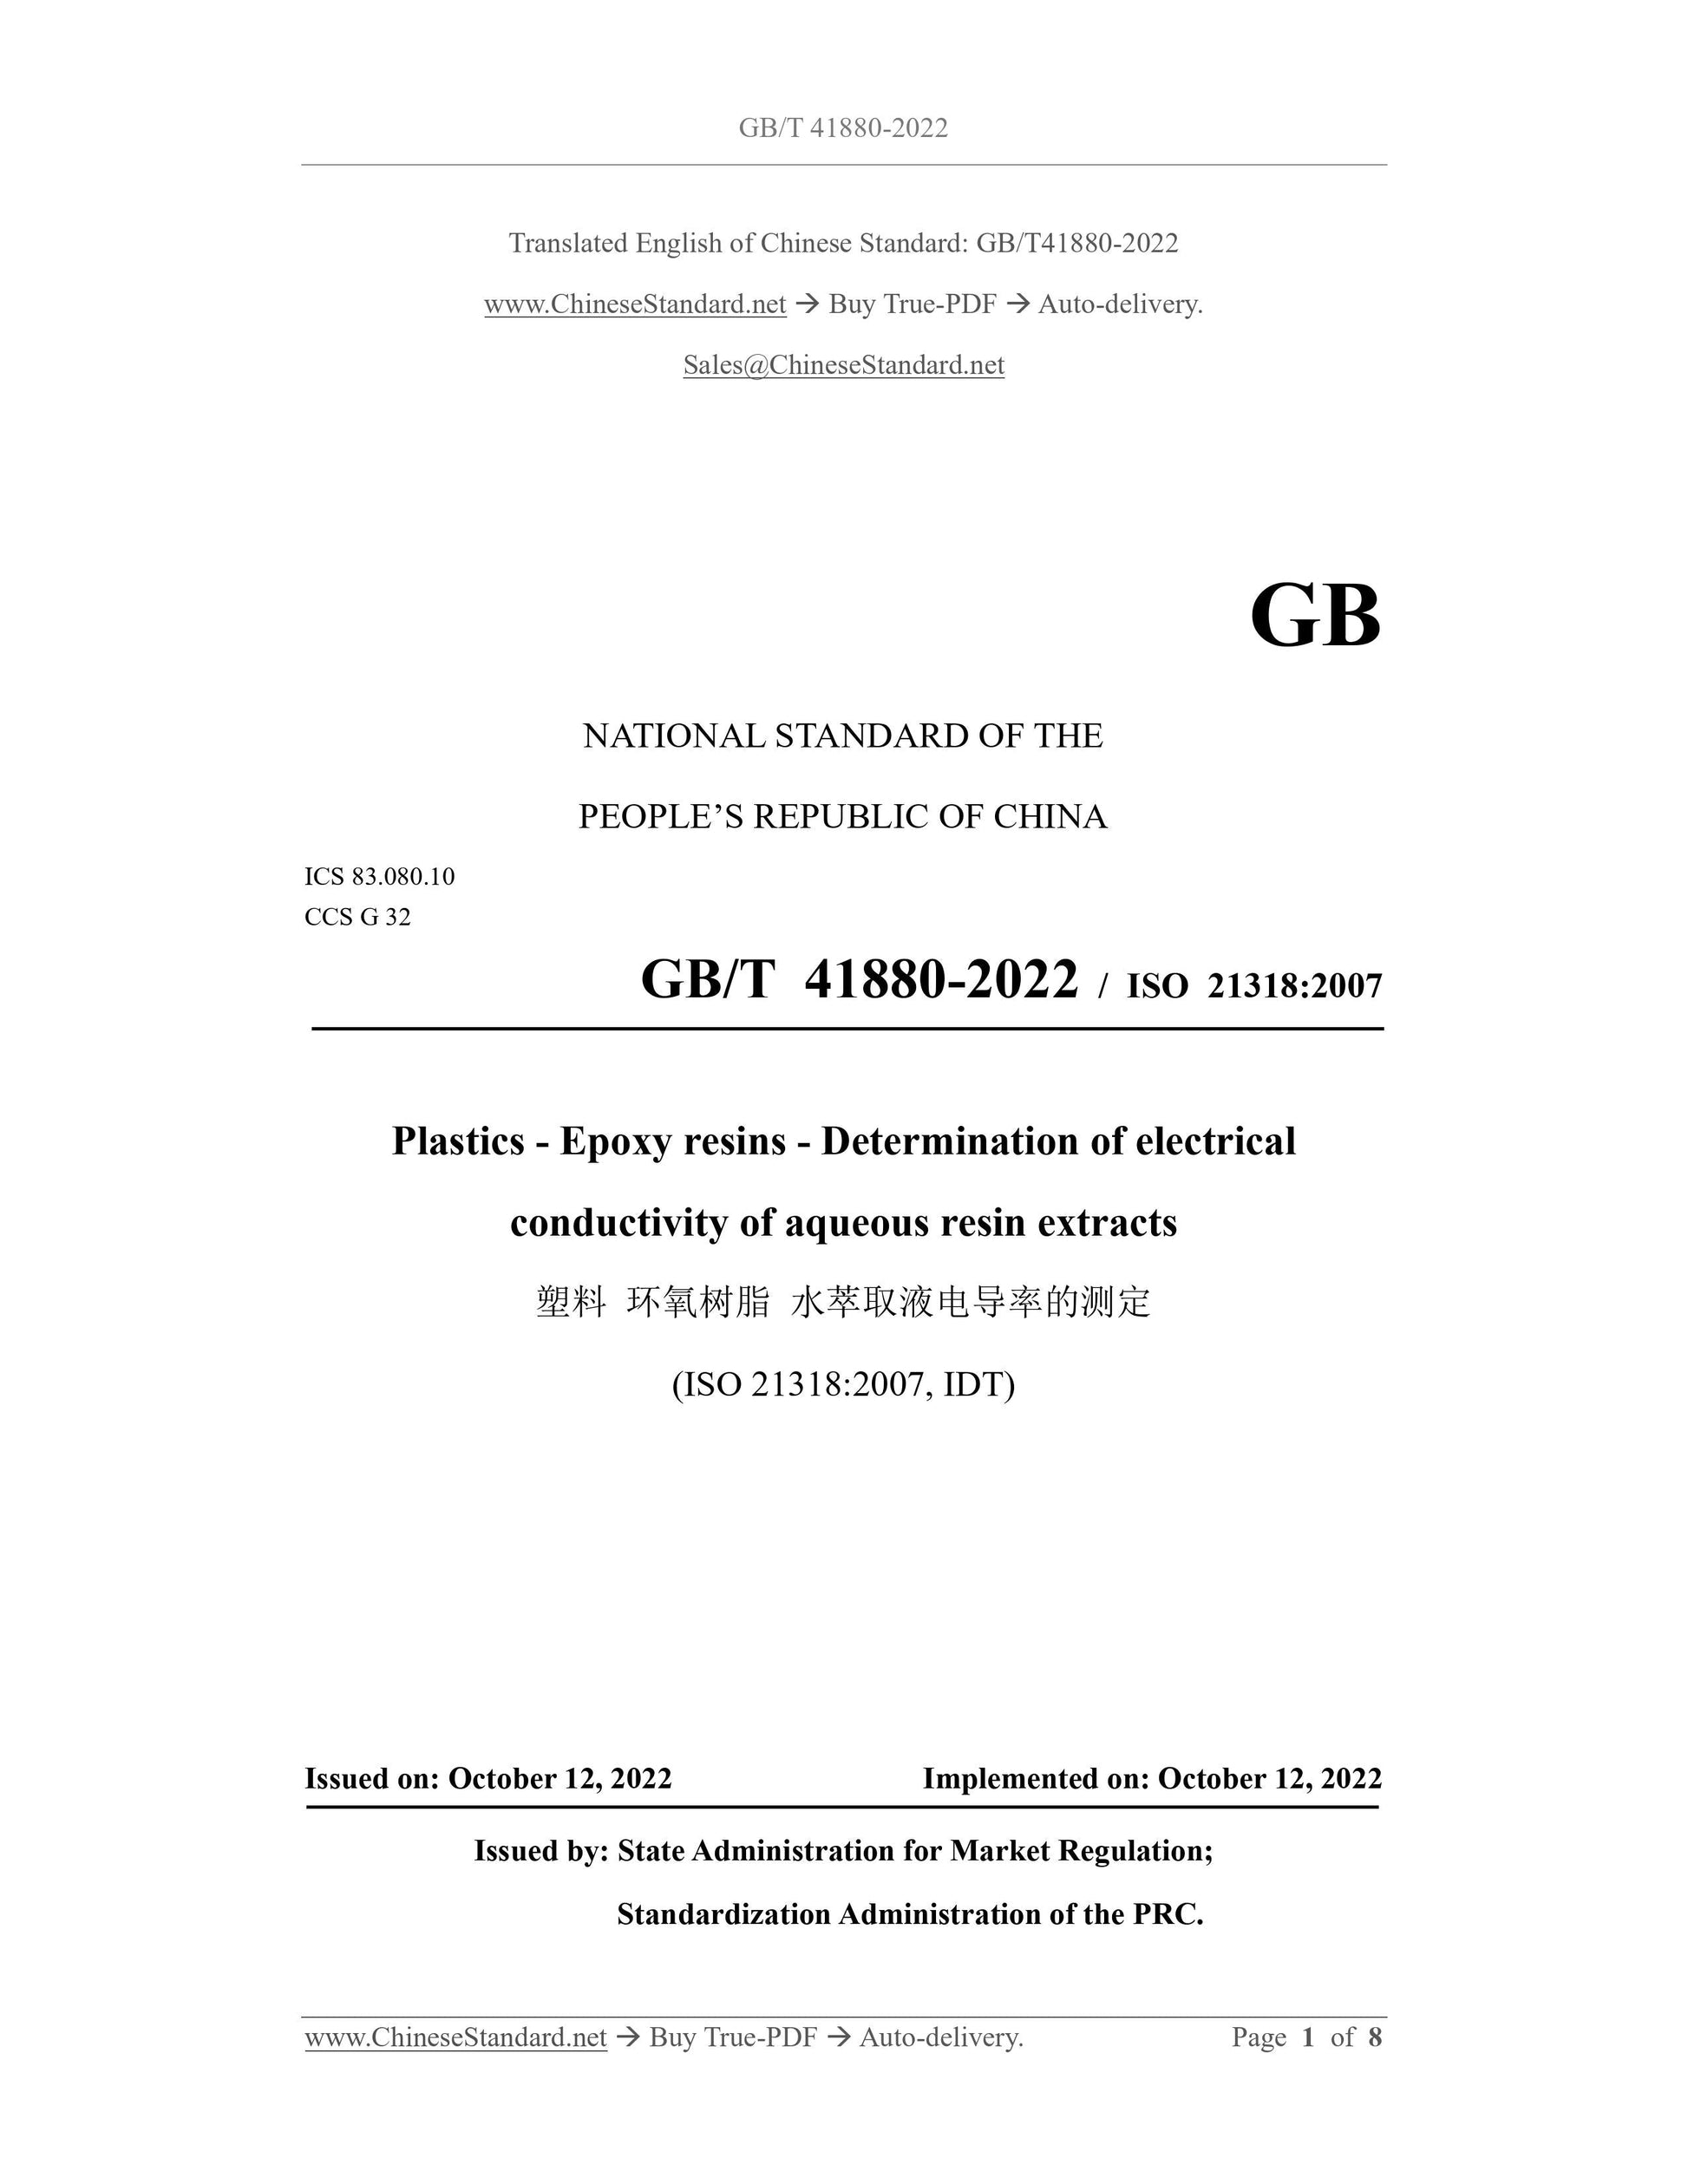 GB/T 41880-2022 Page 1